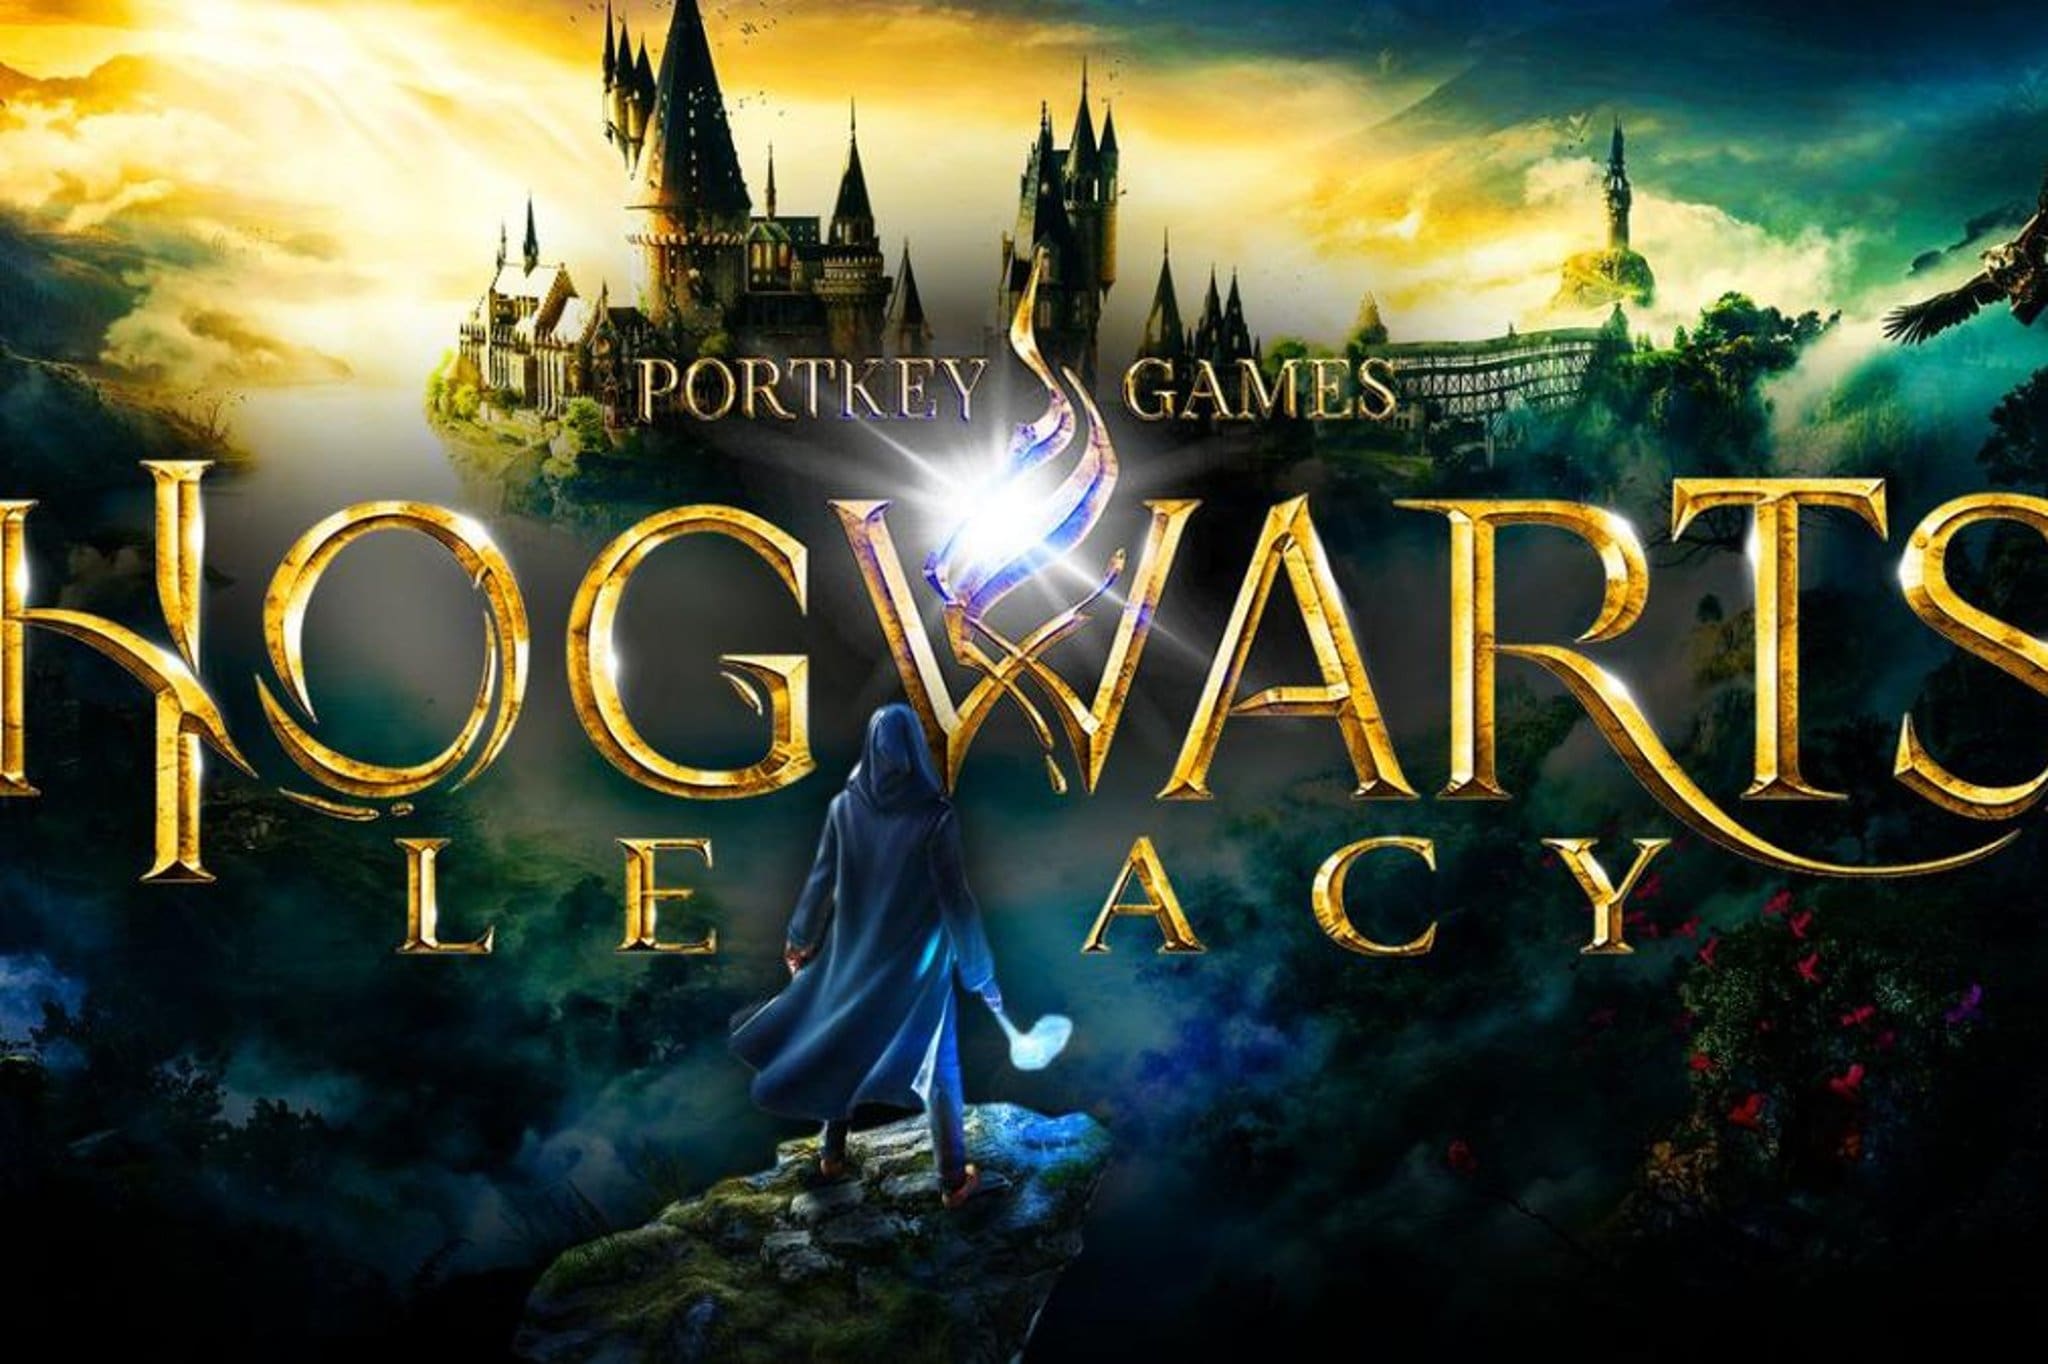 hogwarts legacy xbox series s release date